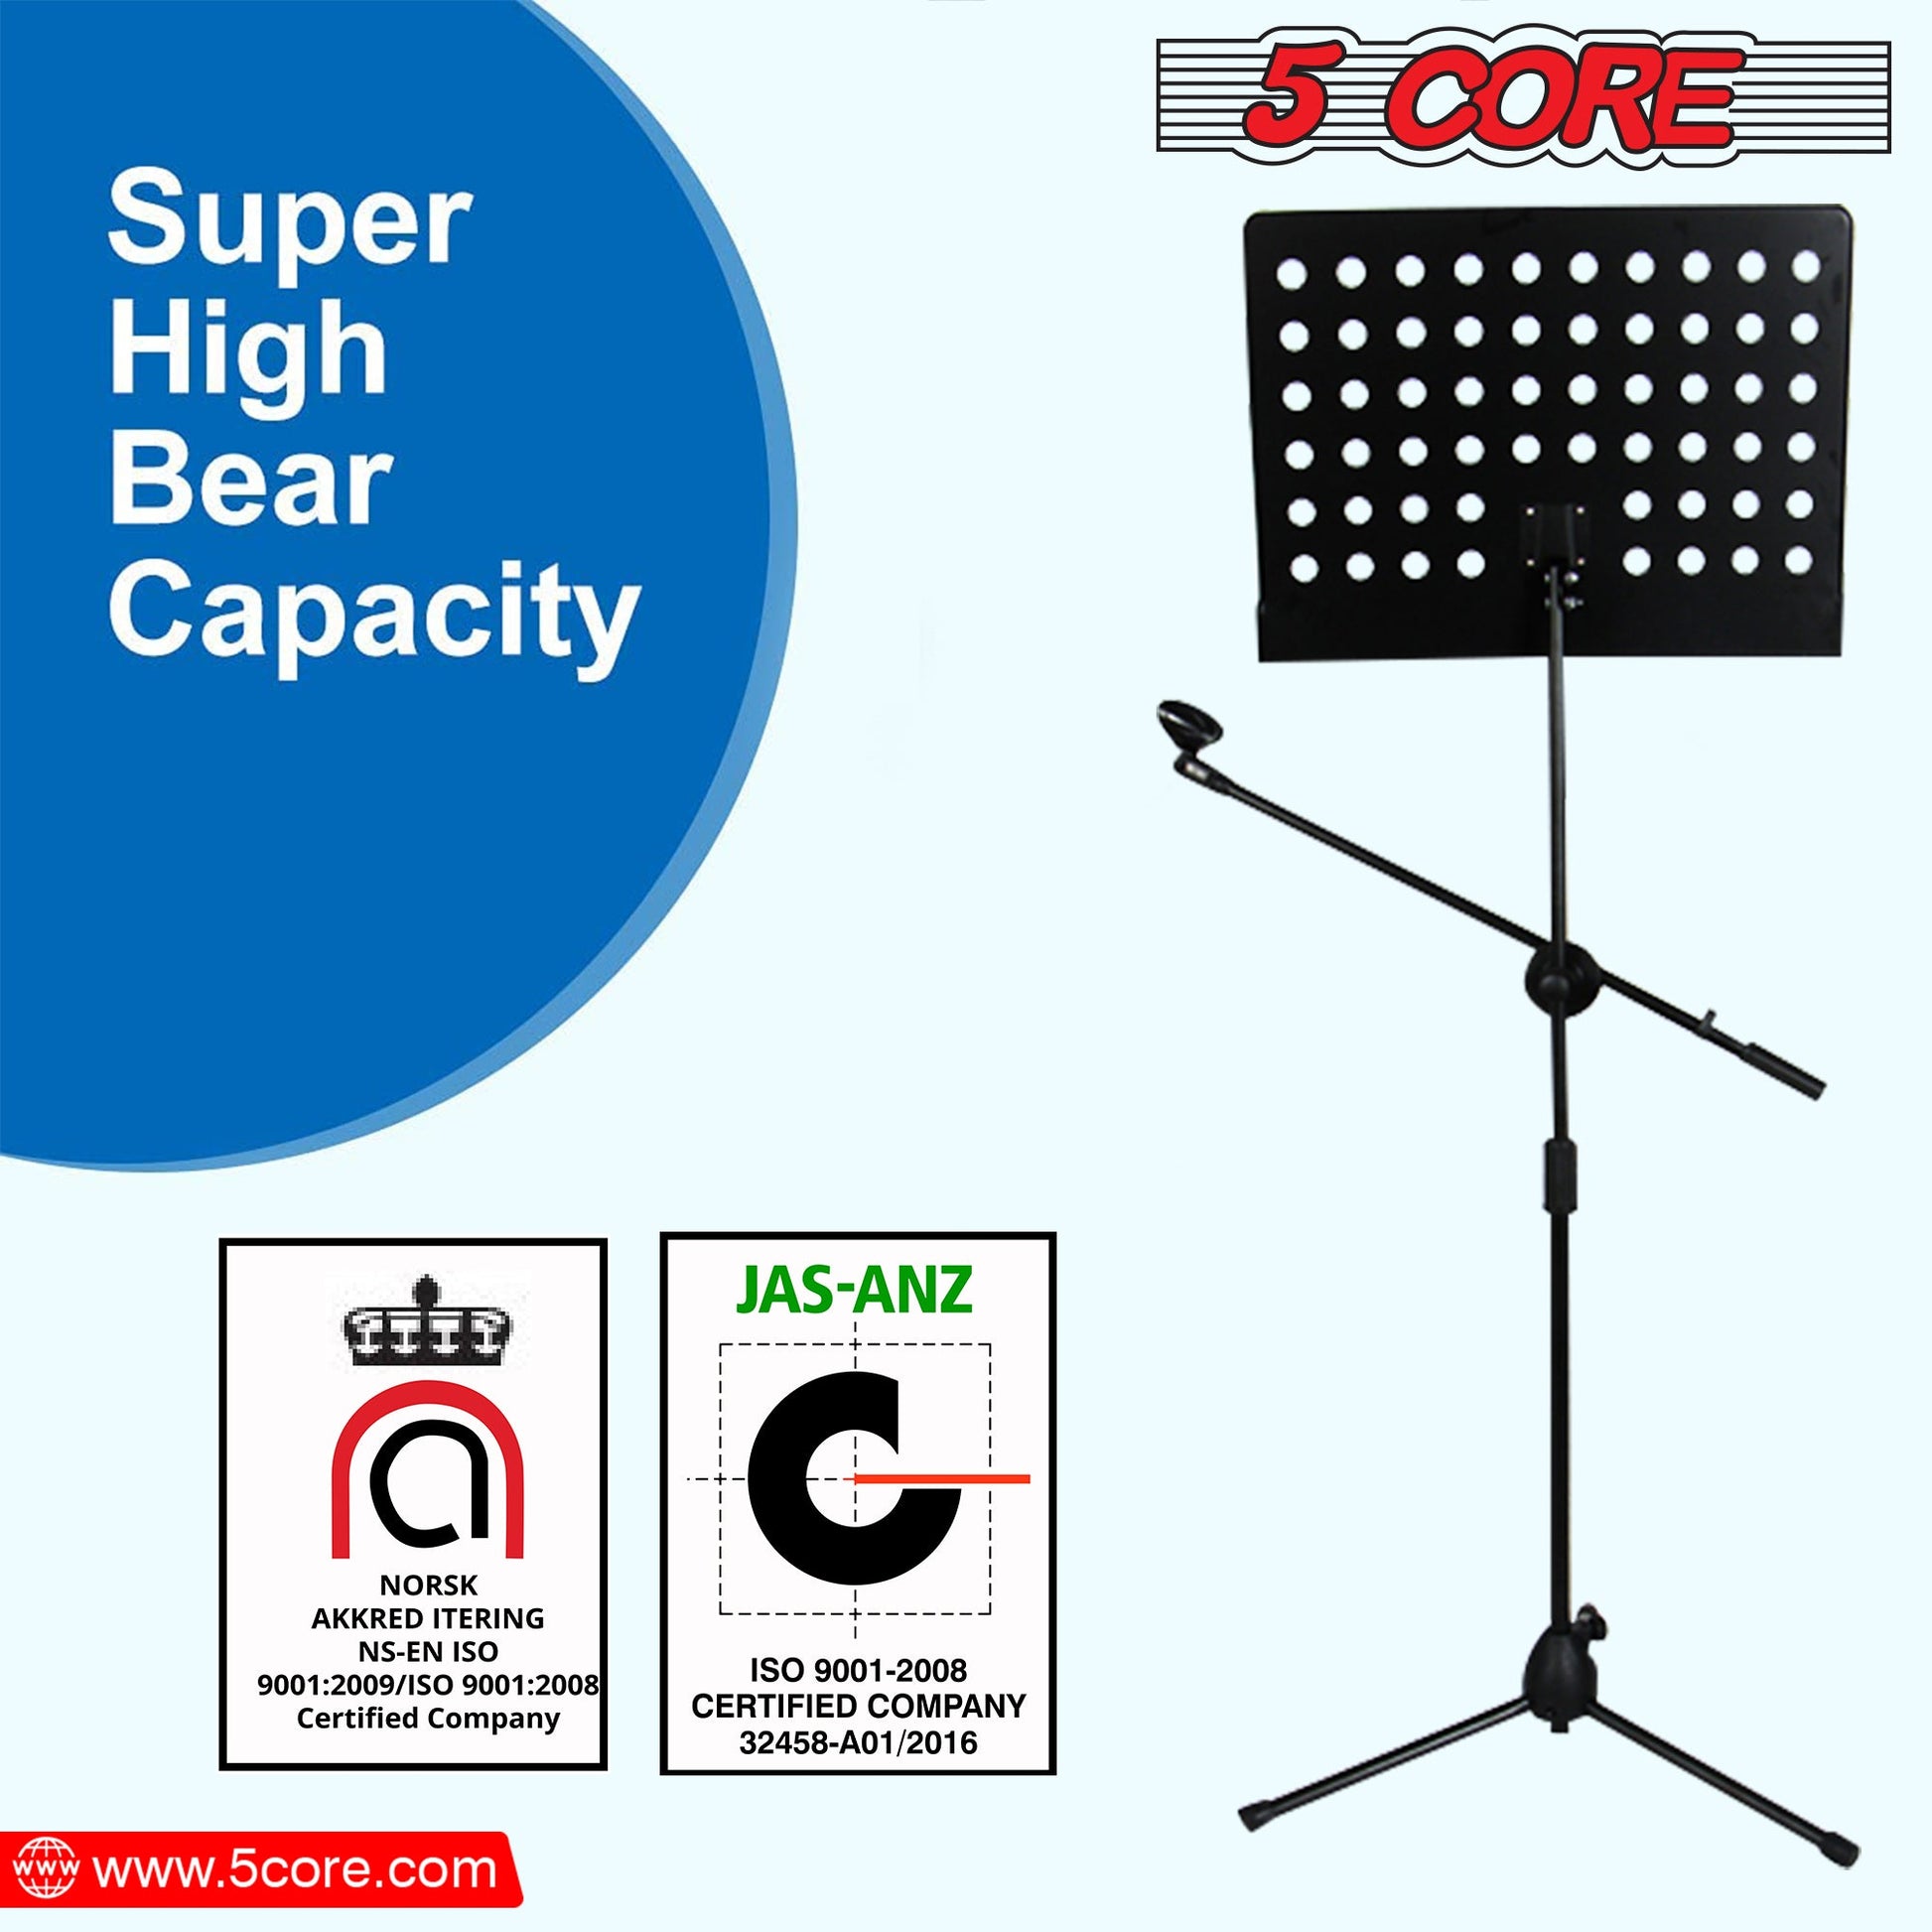 Ultimate Performance Combo: 5 Core Sheet Music Stand with Mic Stand Holder + Premium Vocal Dynamic Mic for Music and Karaoke Delights MUS MH+ND58BLK-5